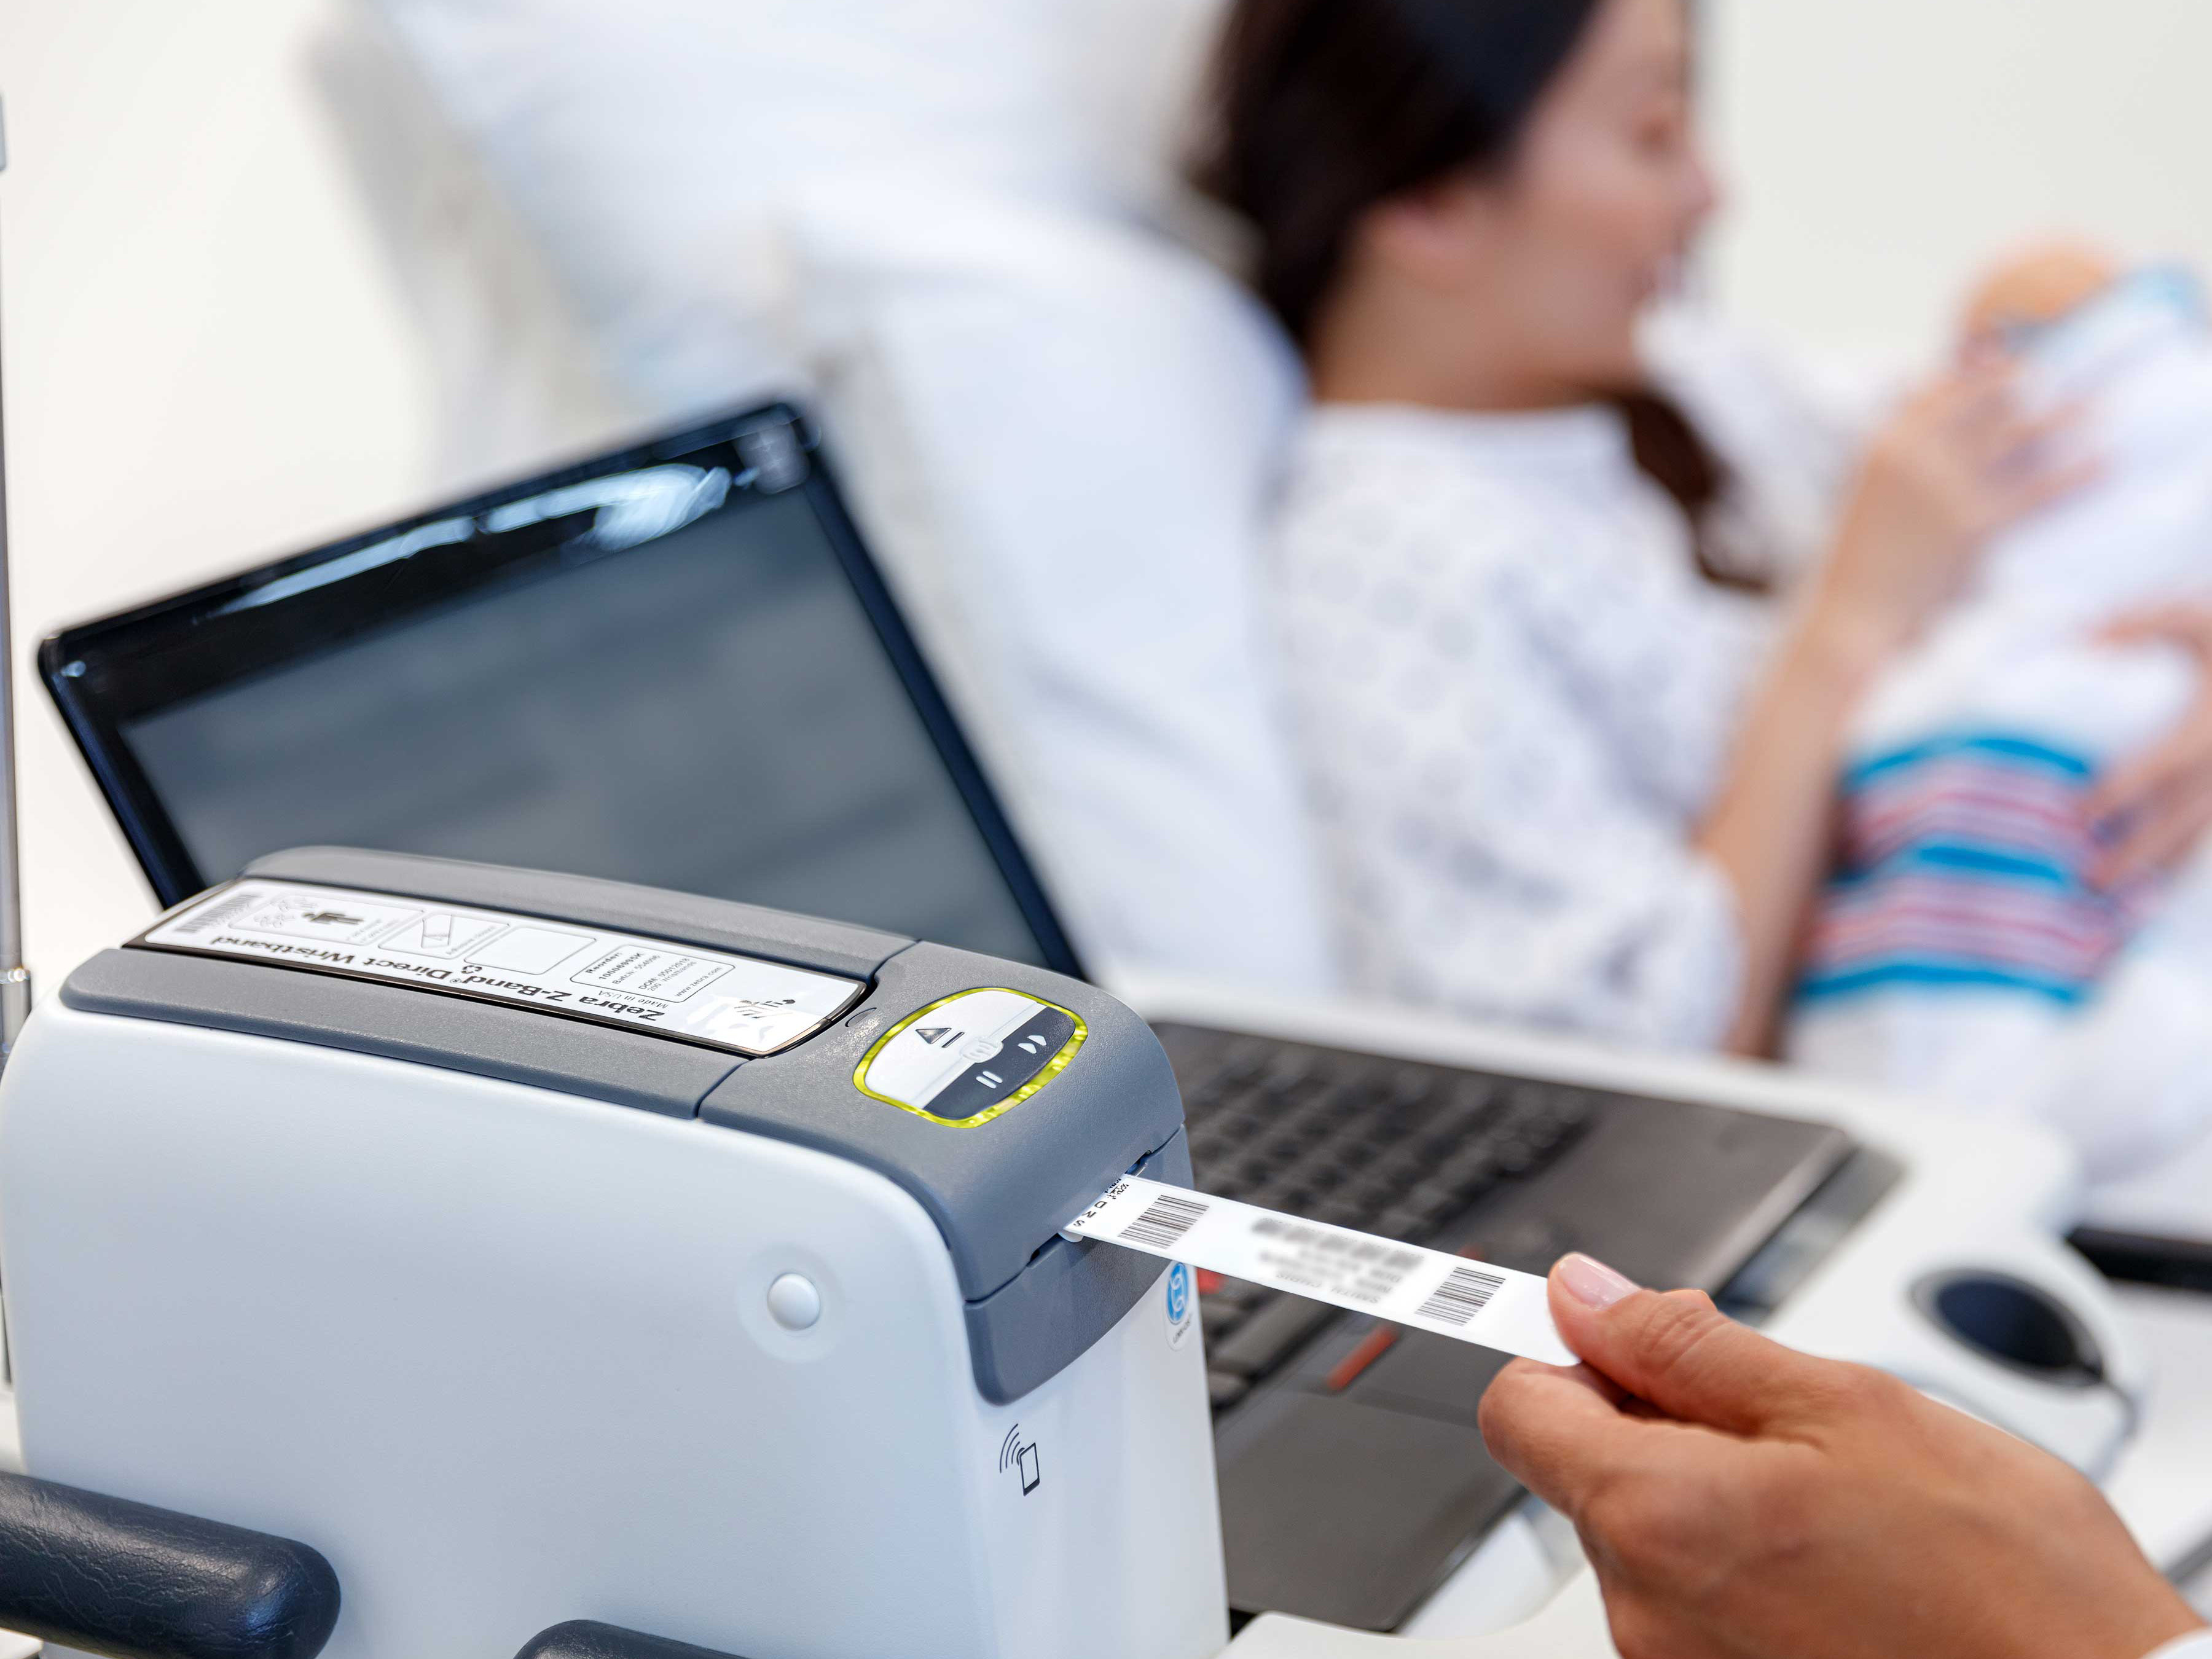 The Zebra Patient Identification wristband is being printed using a Zebra printer next to a patient holding a newborn while lying on a bed. 